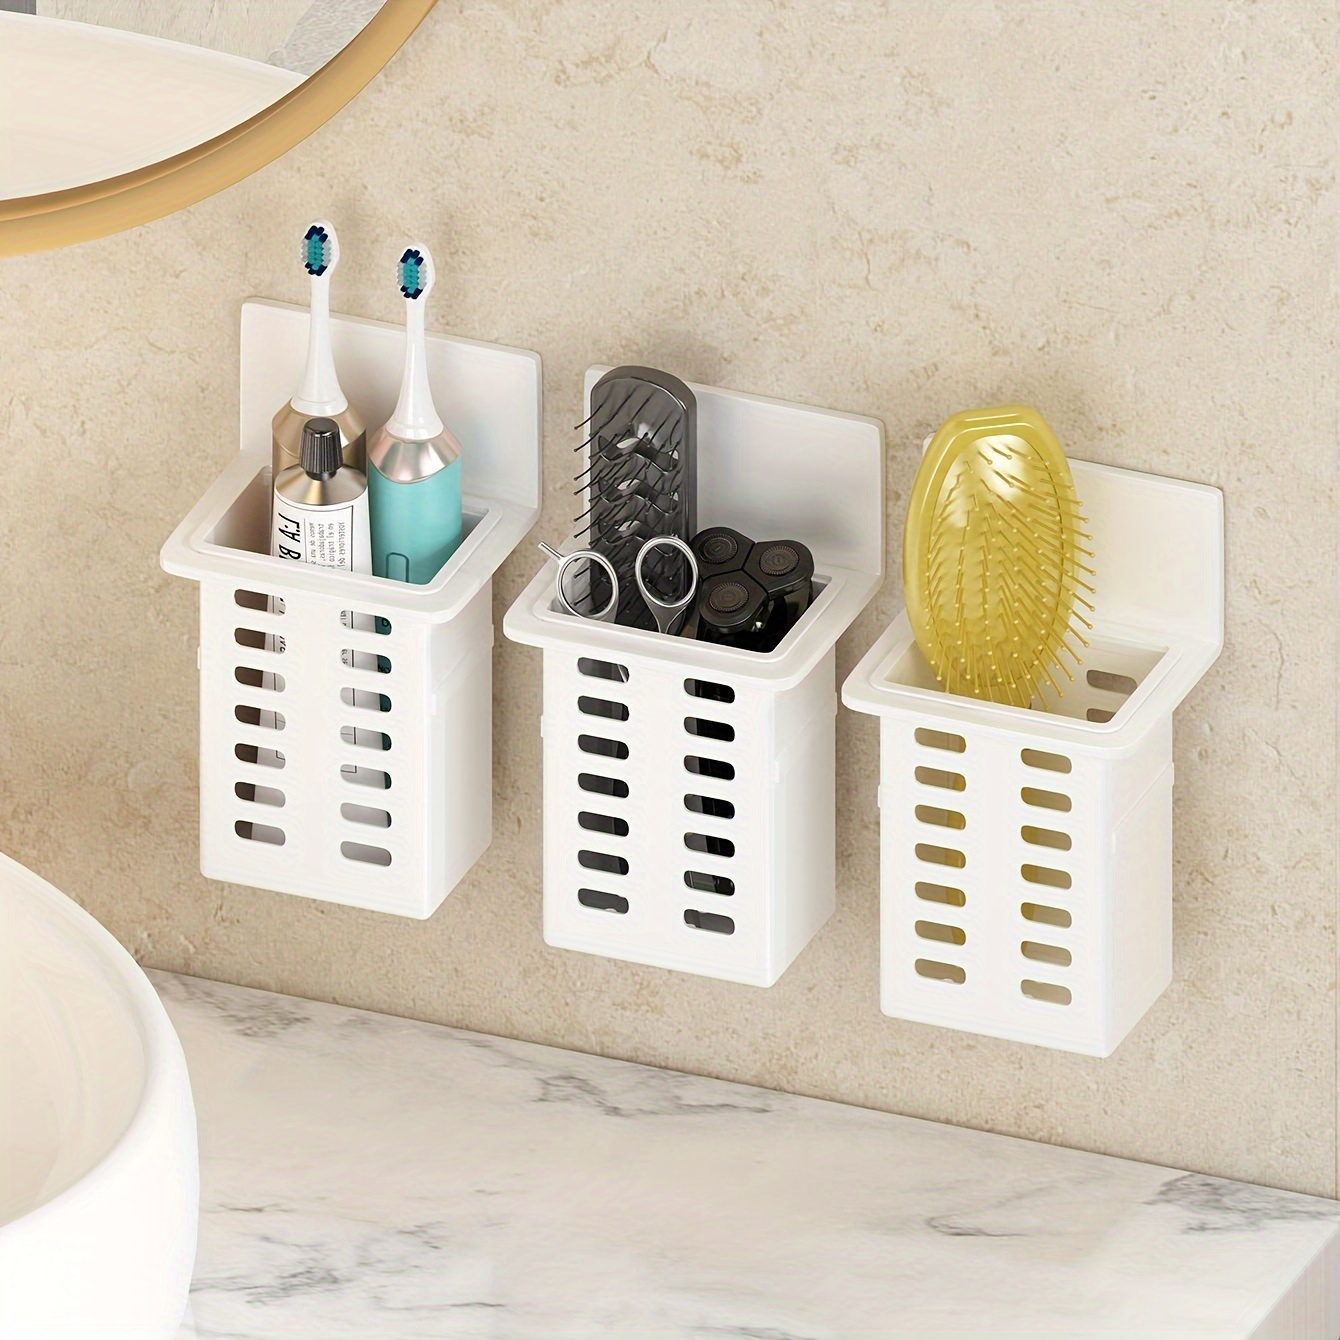 

1pc Toothbrush Holder For Bathroom, Wall Mounted Toothbrush Storage Rack, Bathroom Storage Organizer, Bathroom Multifunctional Toothpaste Toothbrush Container, Bathroom Accessories